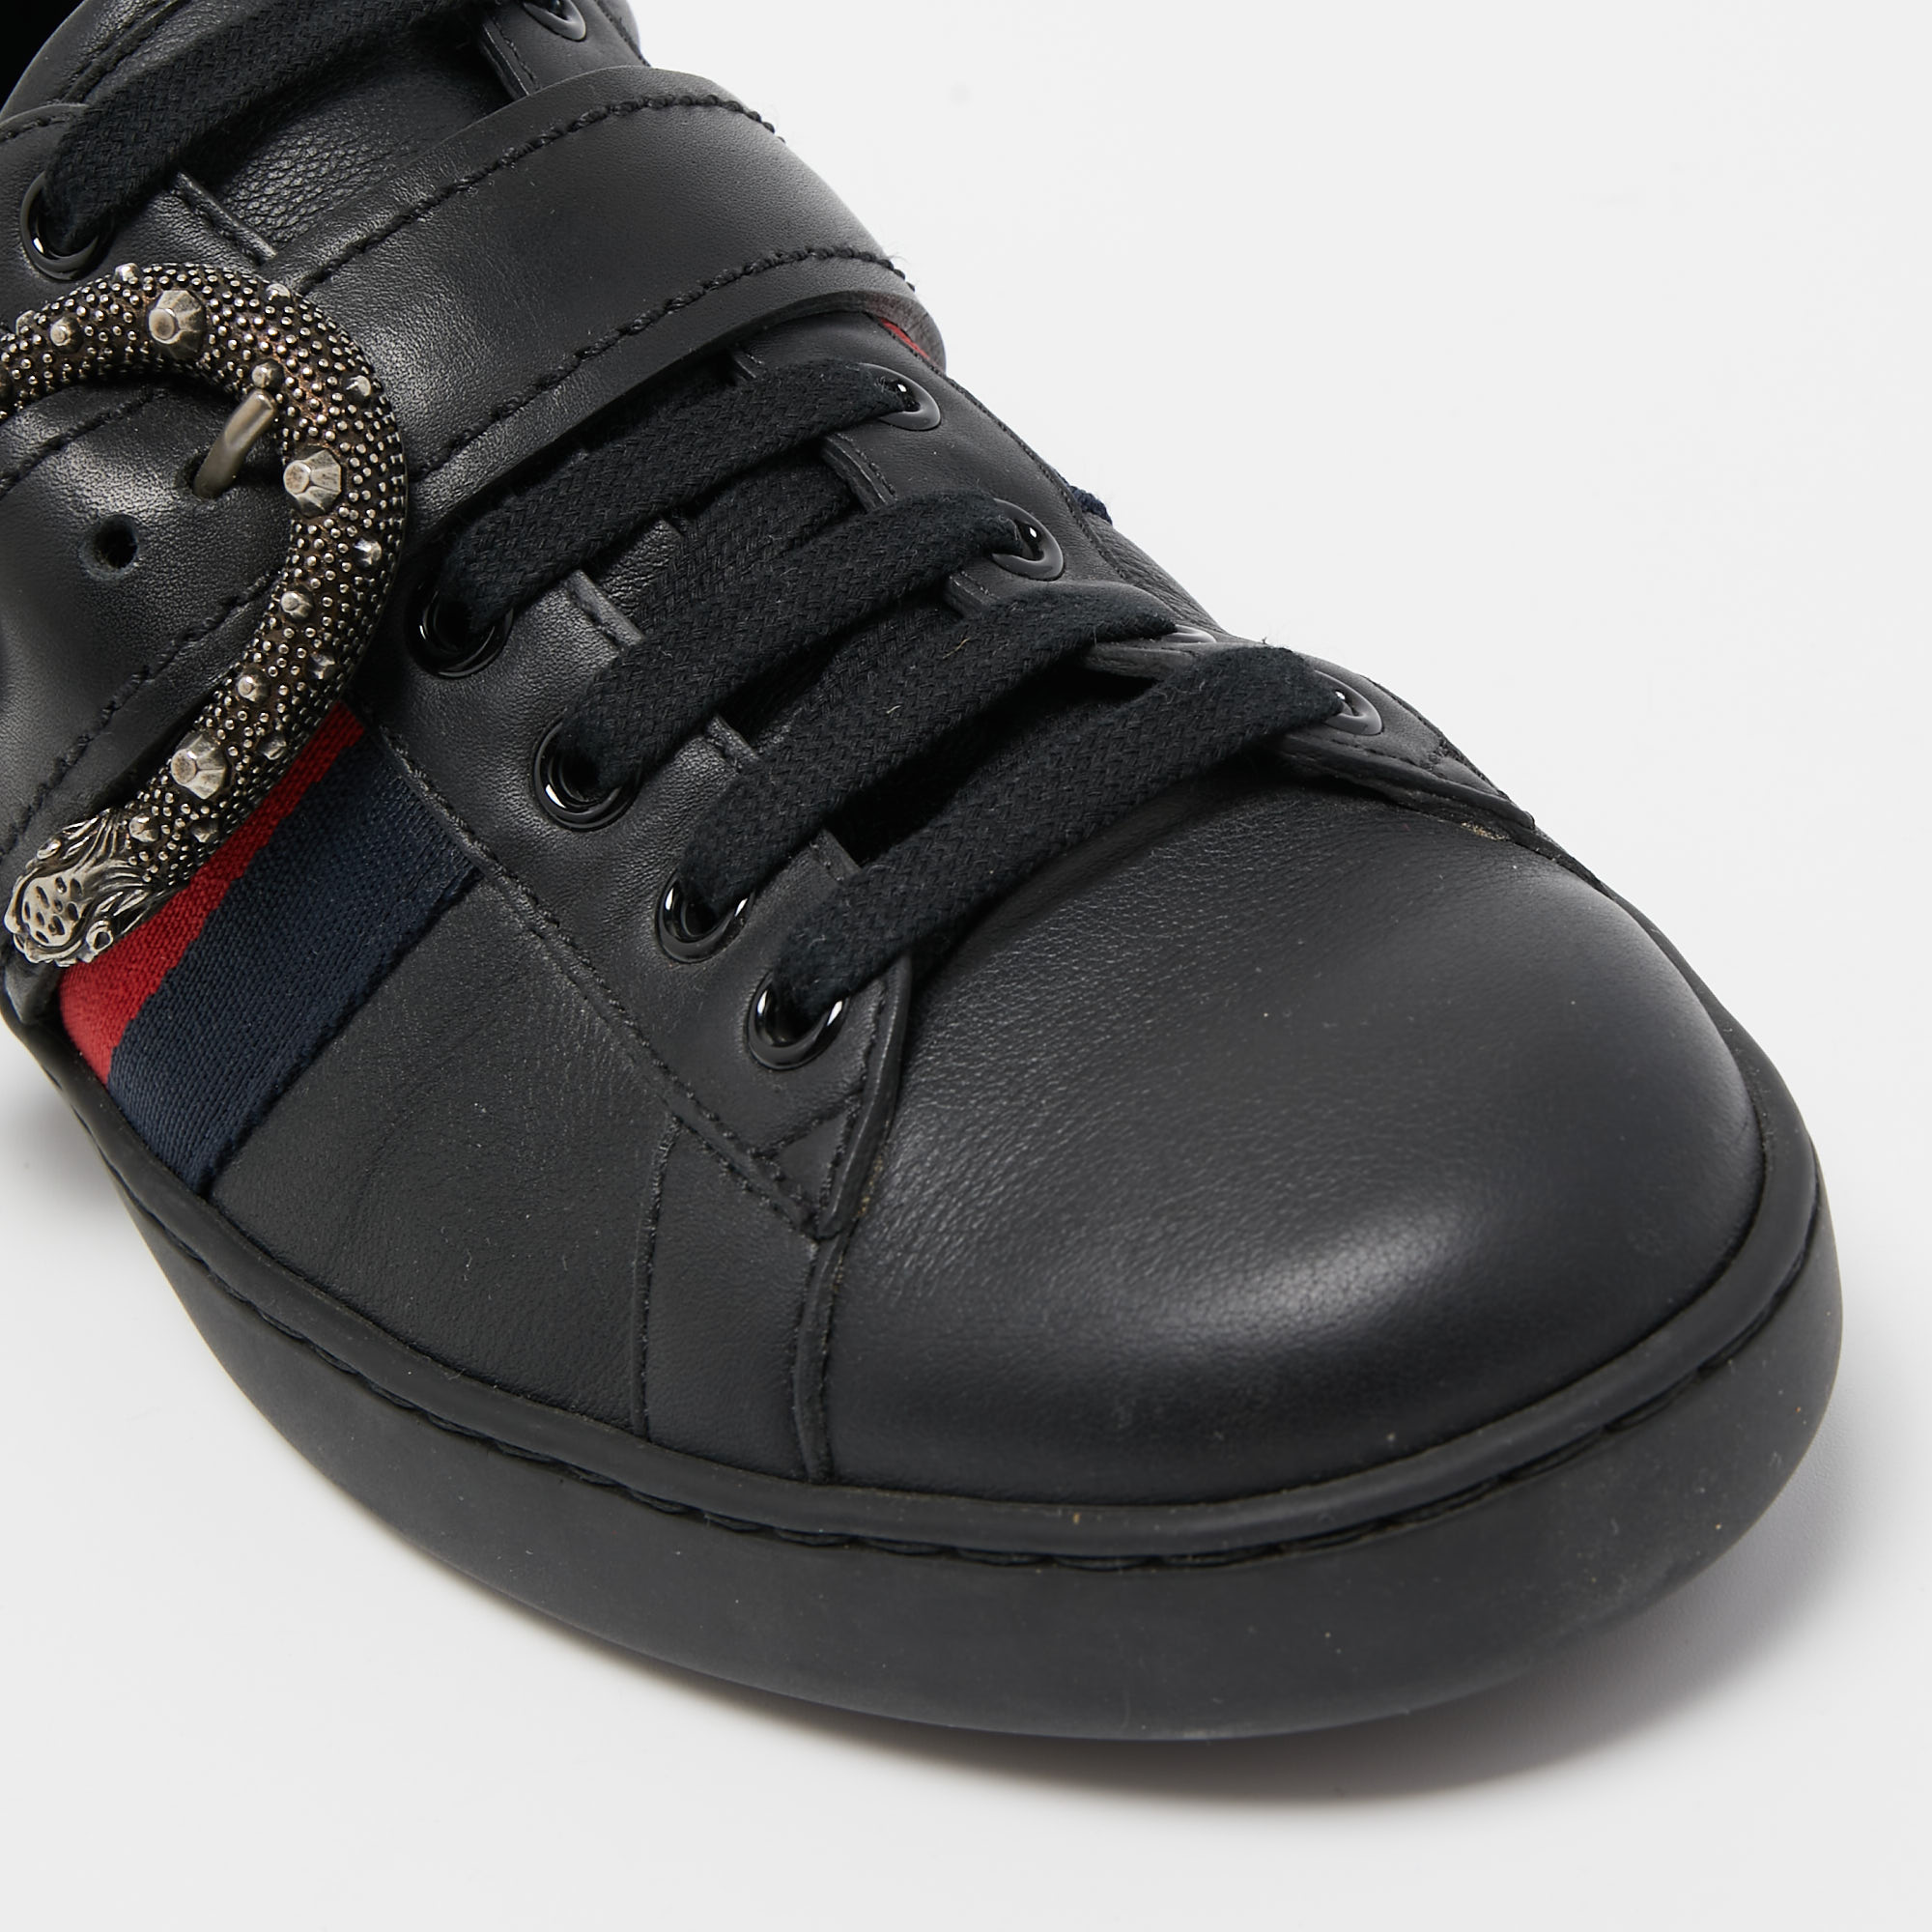 Gucci Black Leather And Python Trim Ace Dionysus Buckle Lace Up Sneakers Size 40.5